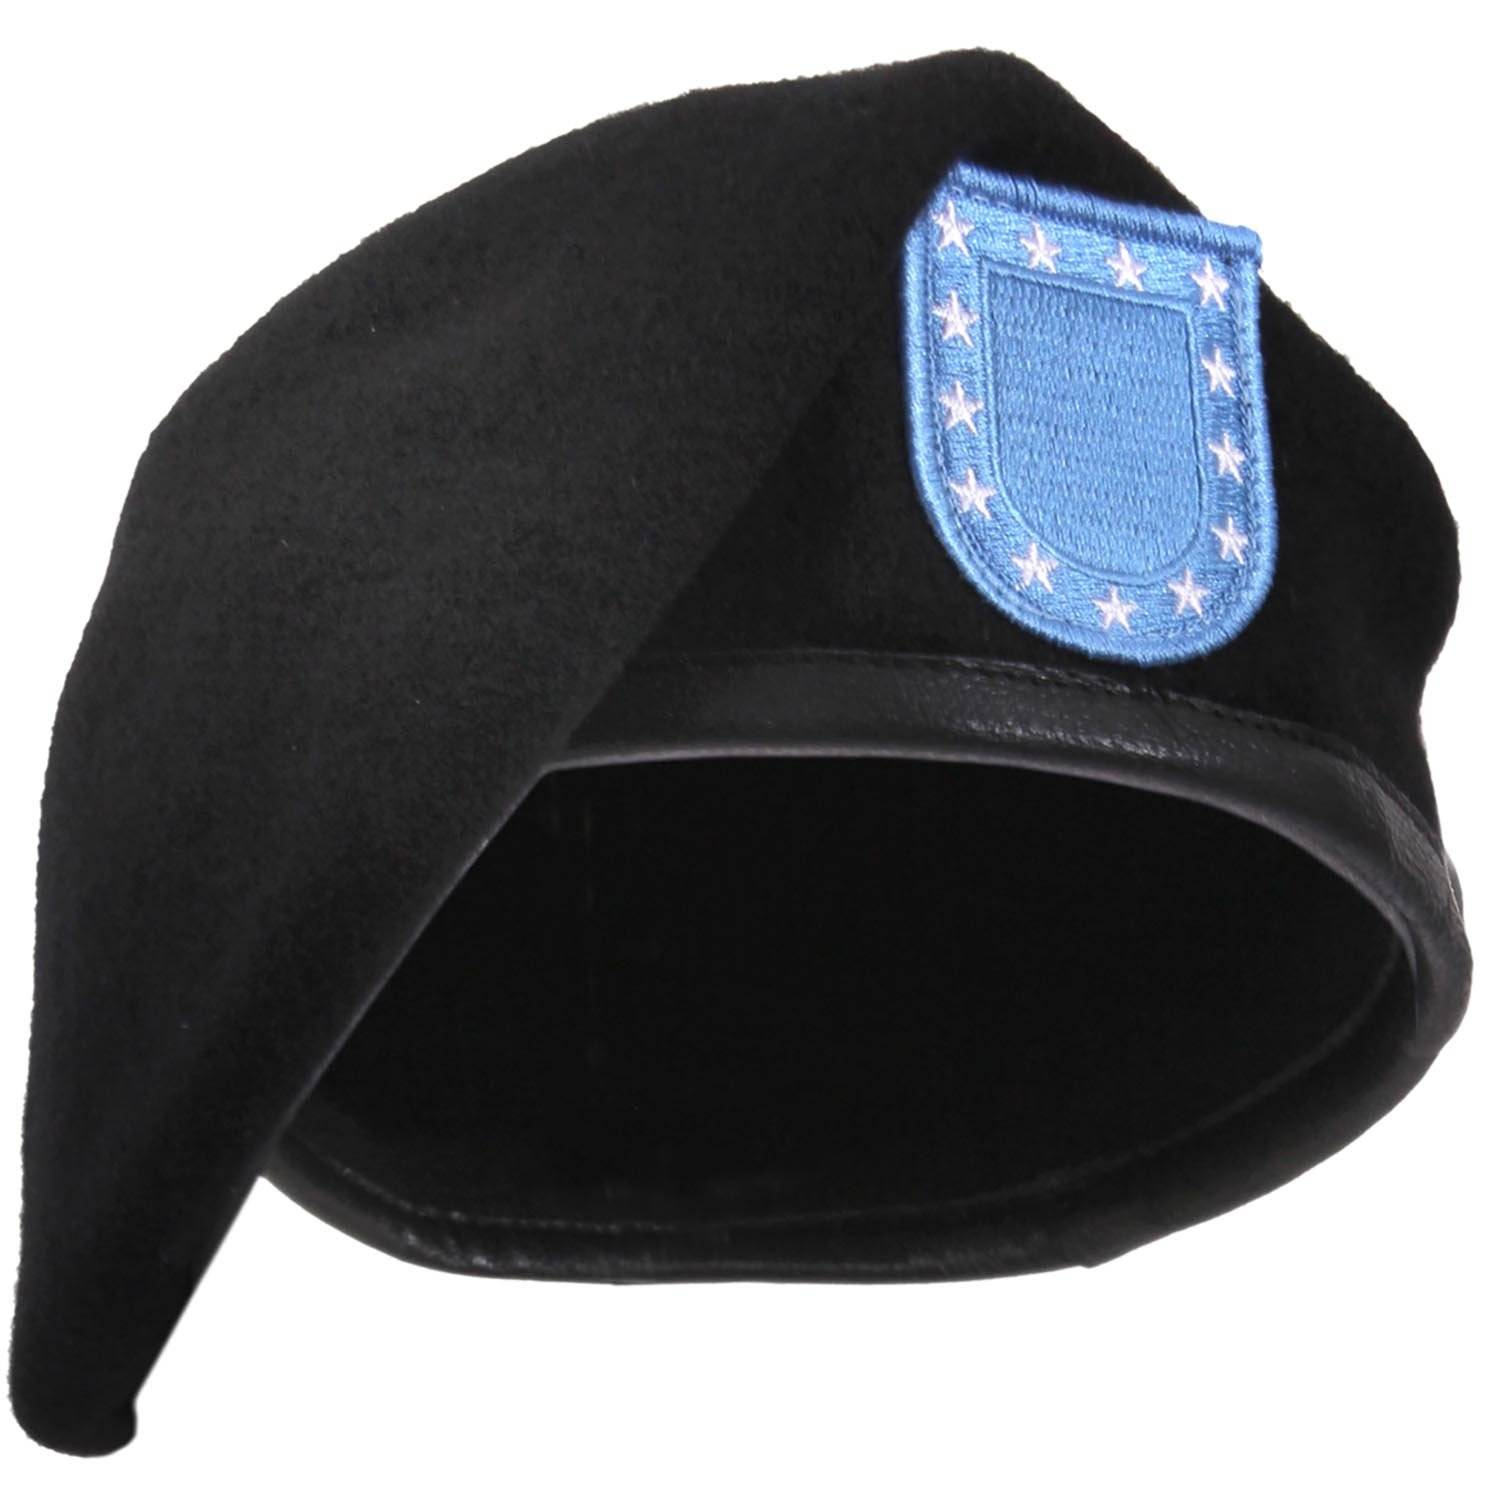 Rothco Inspection Ready Beret With Flash